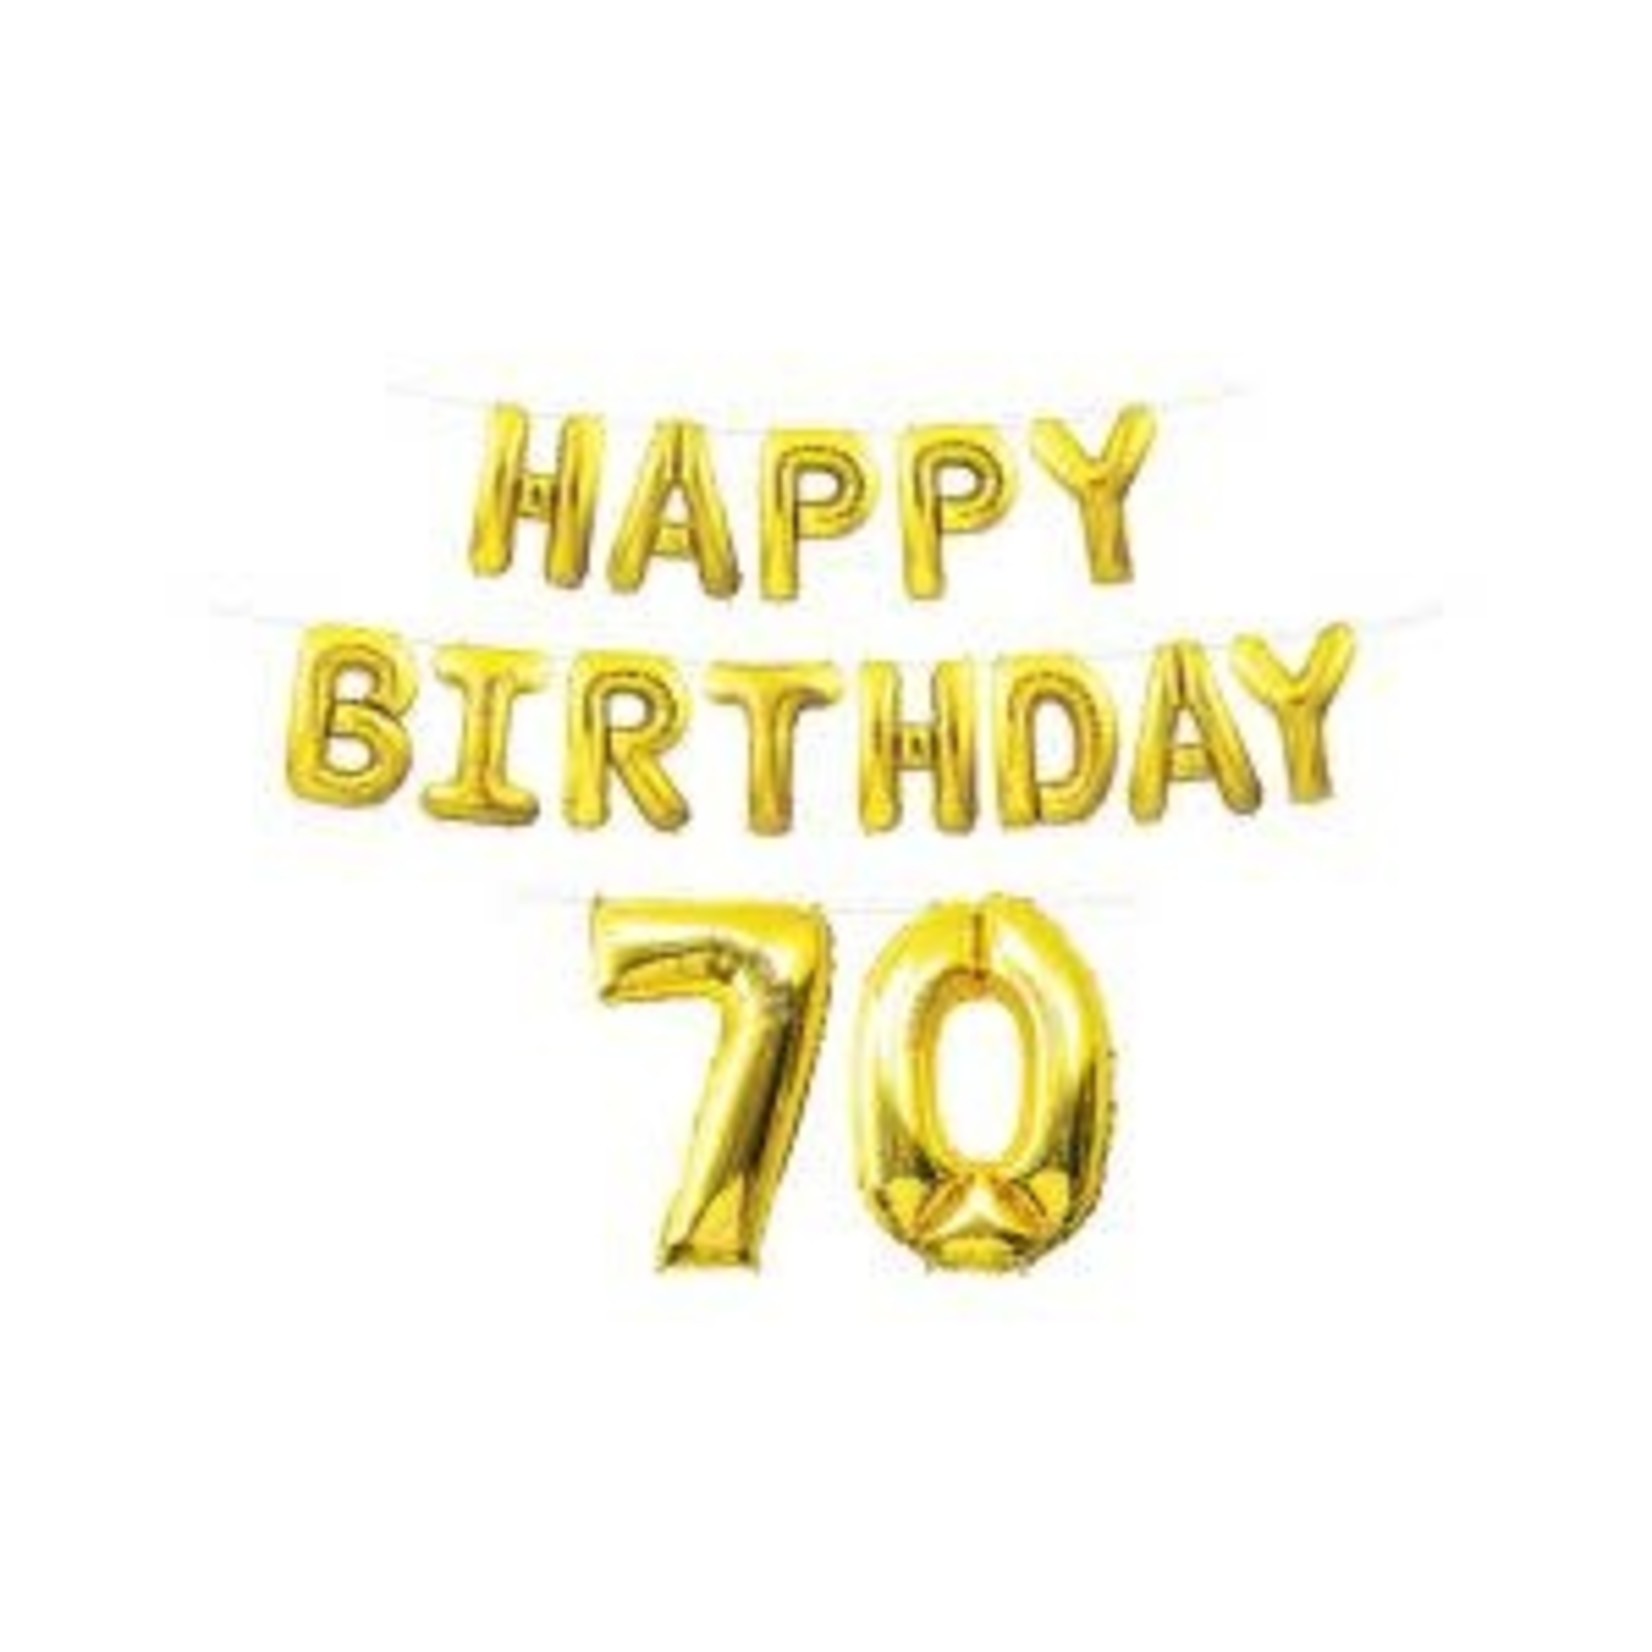 Beistle Gold Happy 70th Birthday Air-Filled Letter Balloon Banner - 15ft.